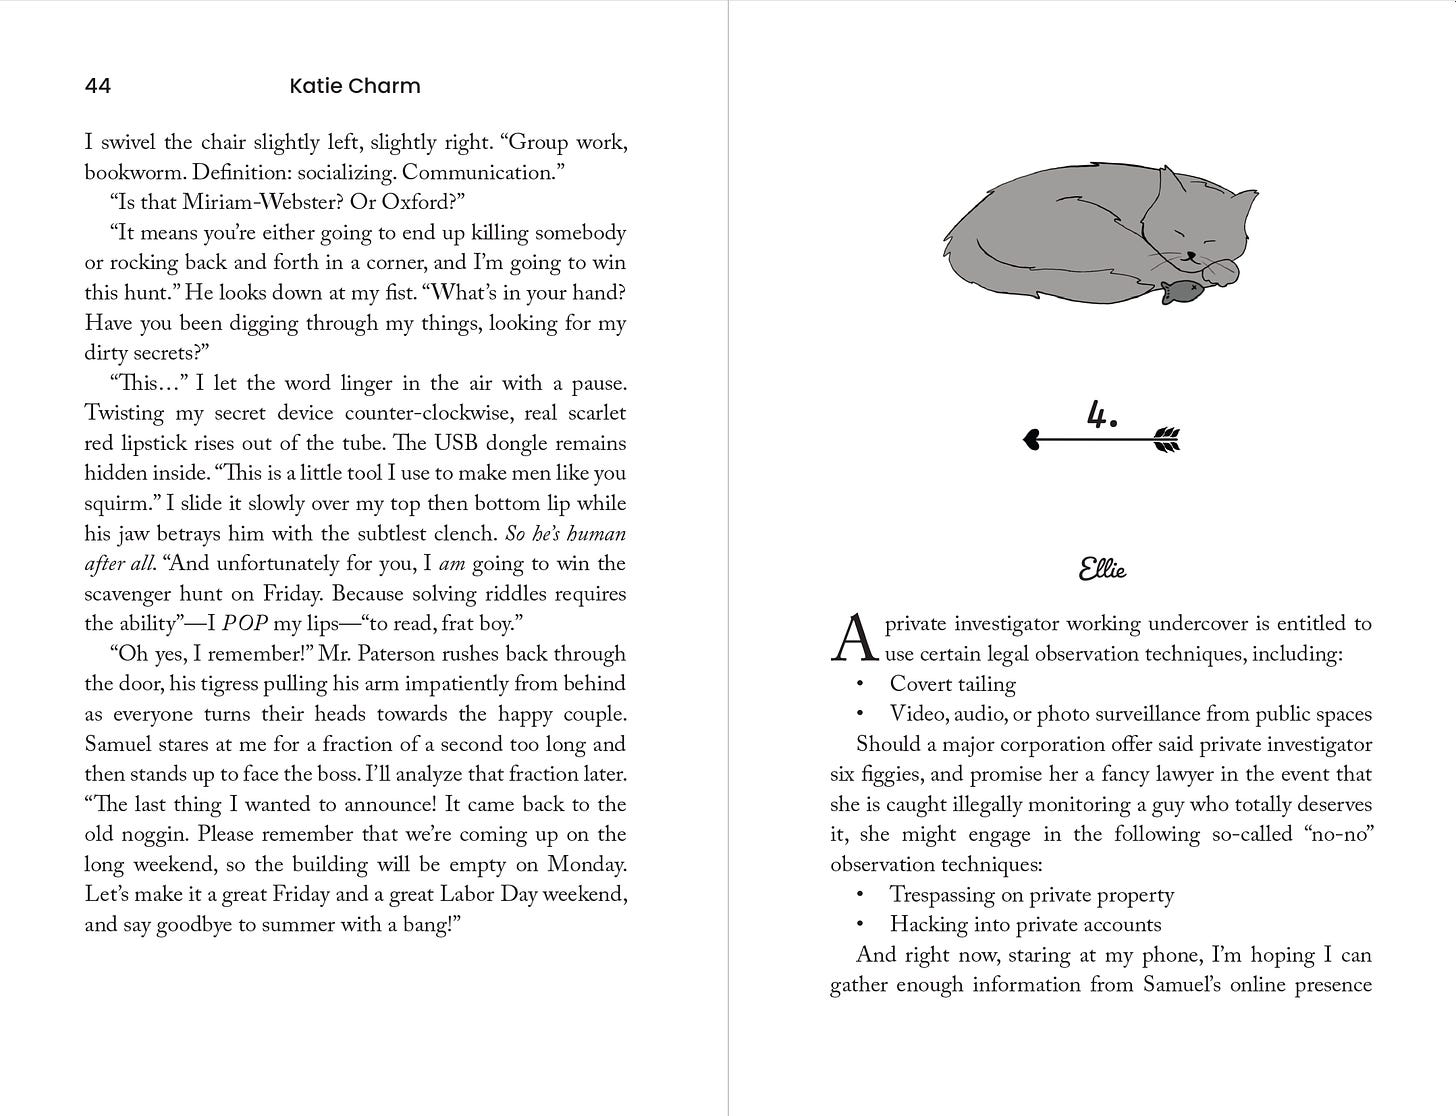 A two page sample from the paperback, showing the end of "Stalker vs. Stalker" chapter 3 and the start of chapter 4